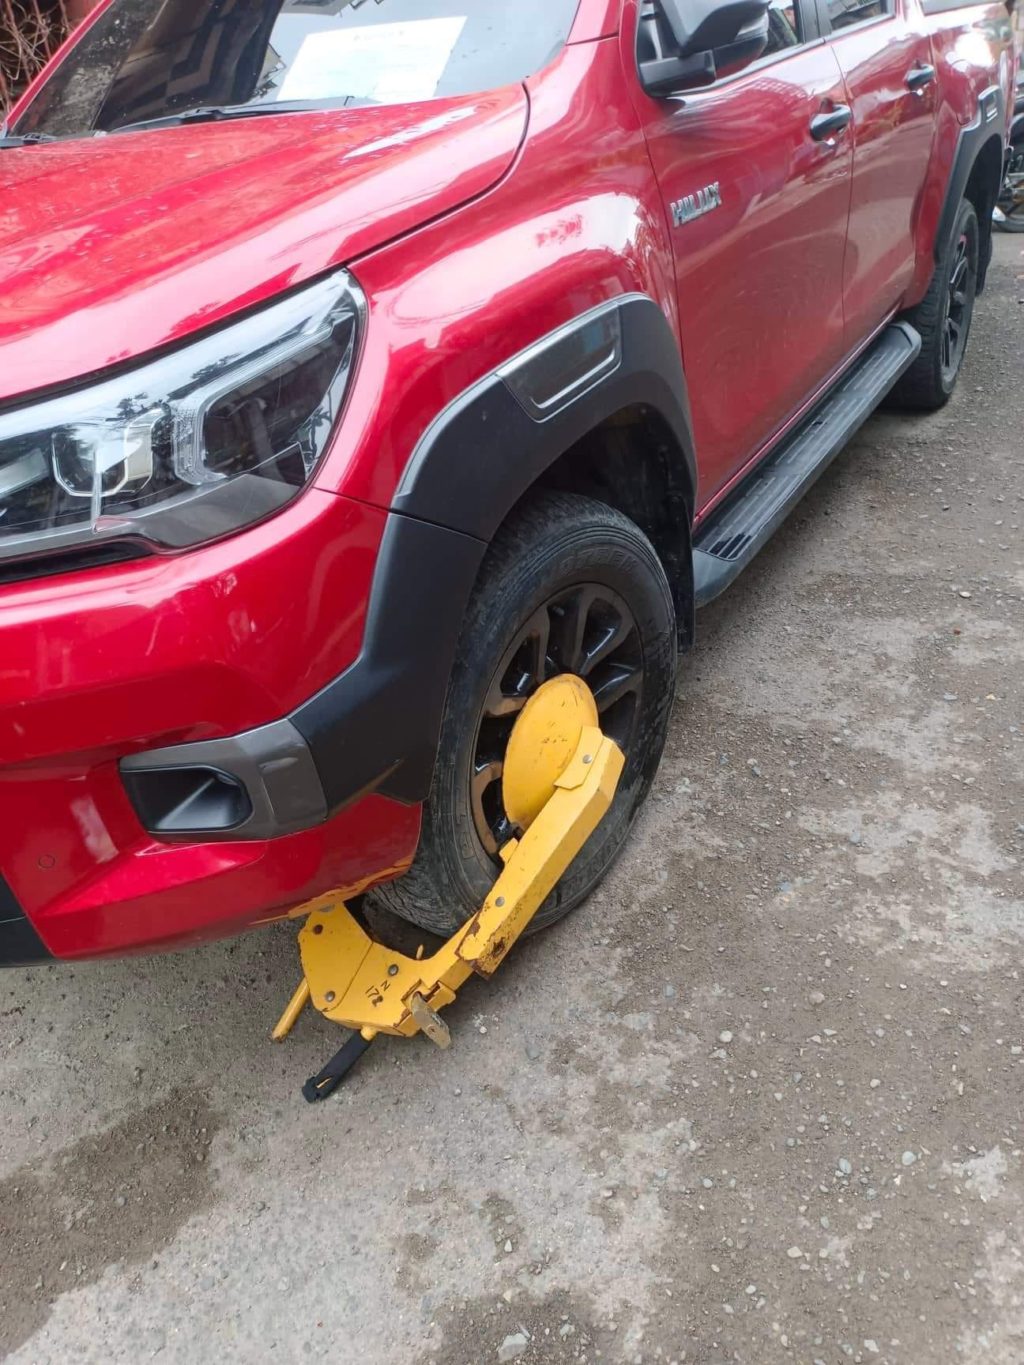 The clamped vehicle of Cebu City Councilor Jaypee Labella.